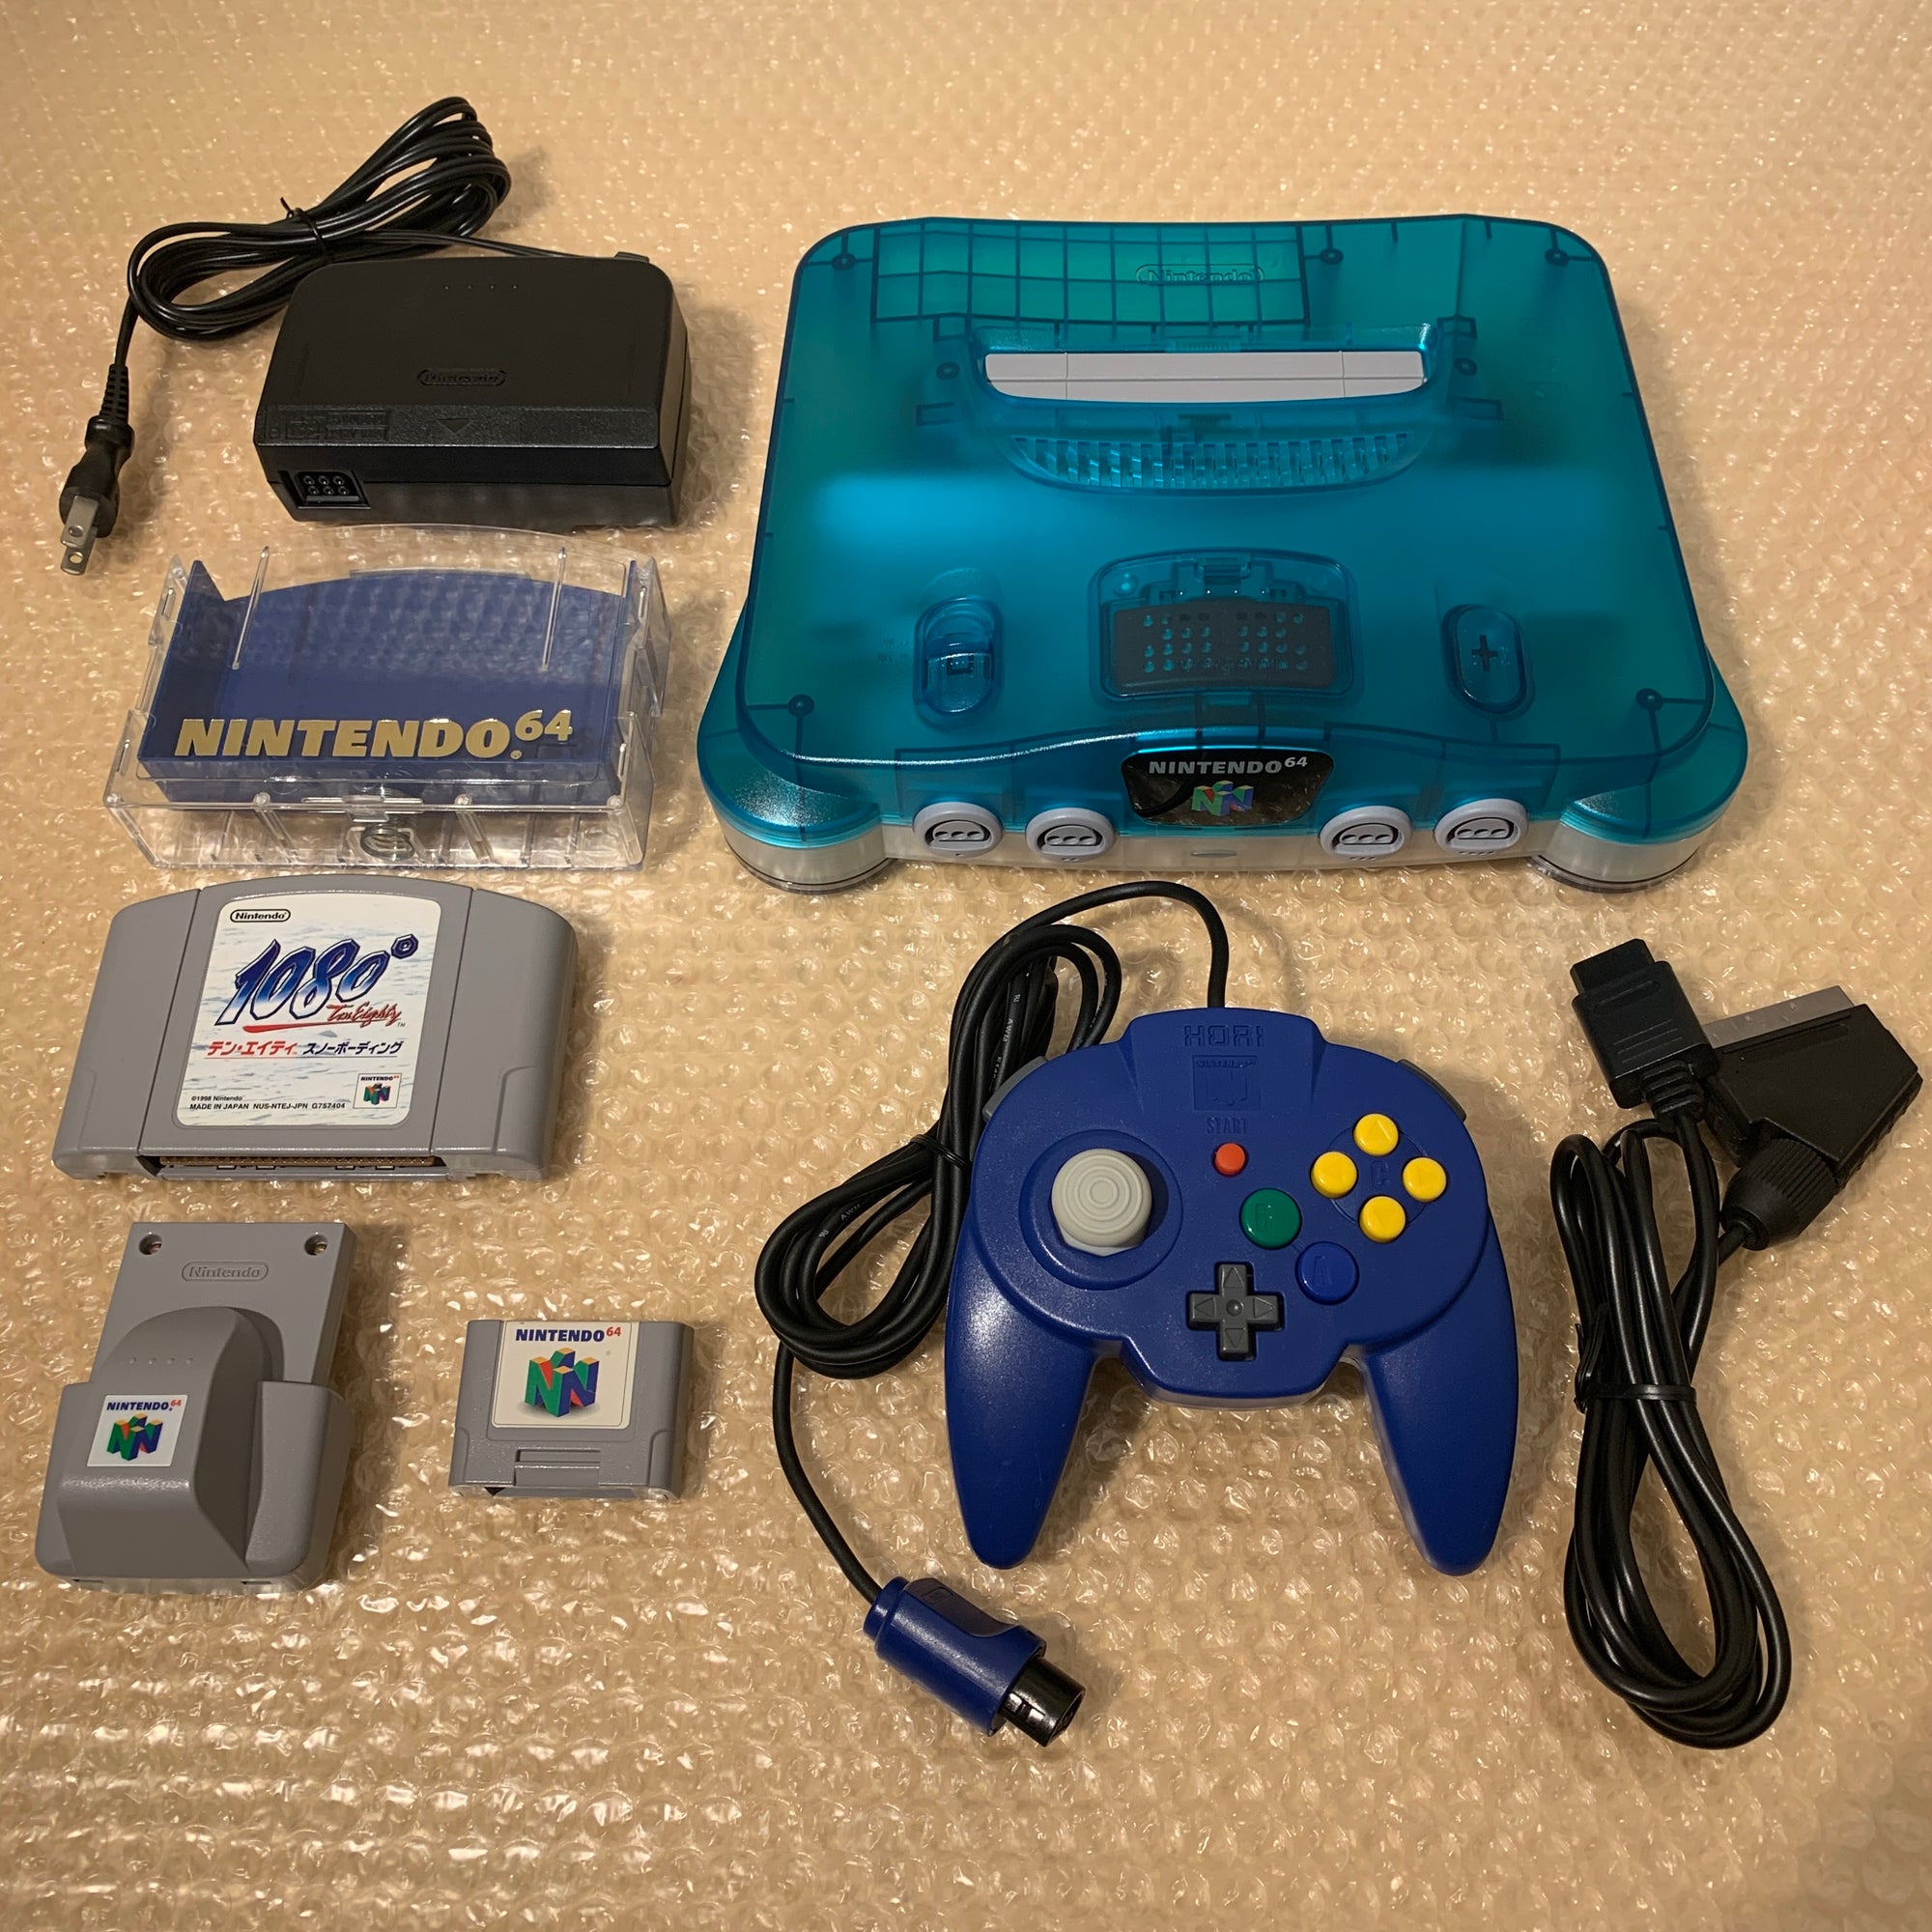 Clear blue Nintendo 64 set with N64Digital kit - compatible with JP and US games